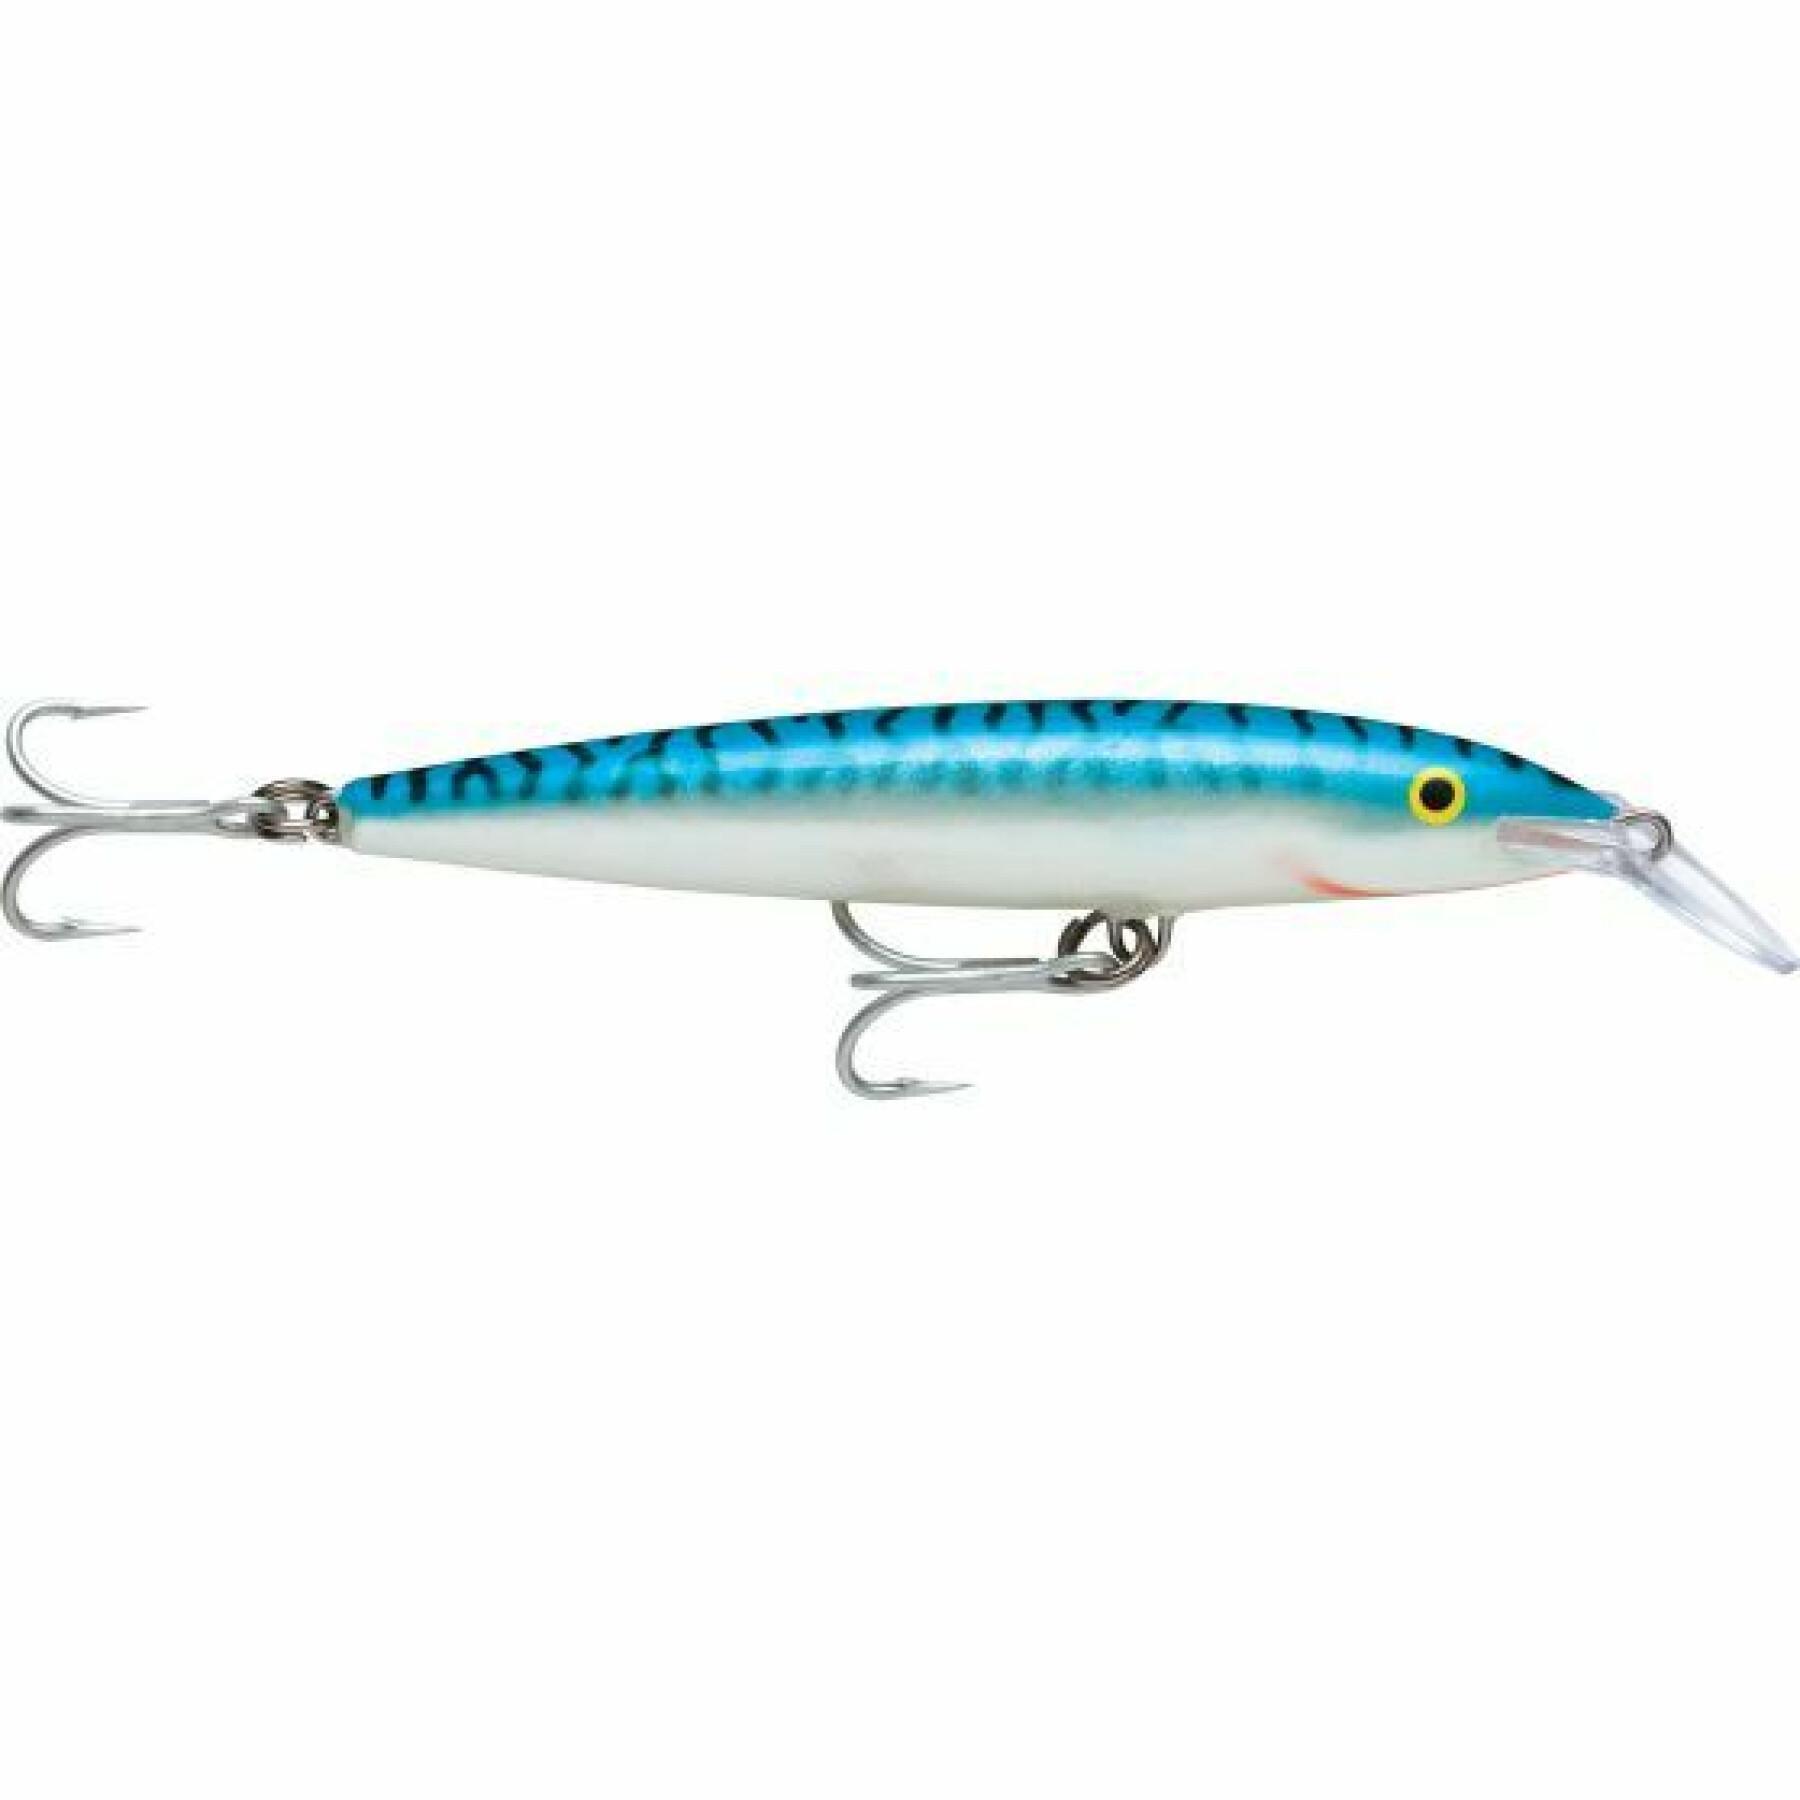 Floating lure Rapala floating magnum 18 cm - Hard lures - Lures - Sea